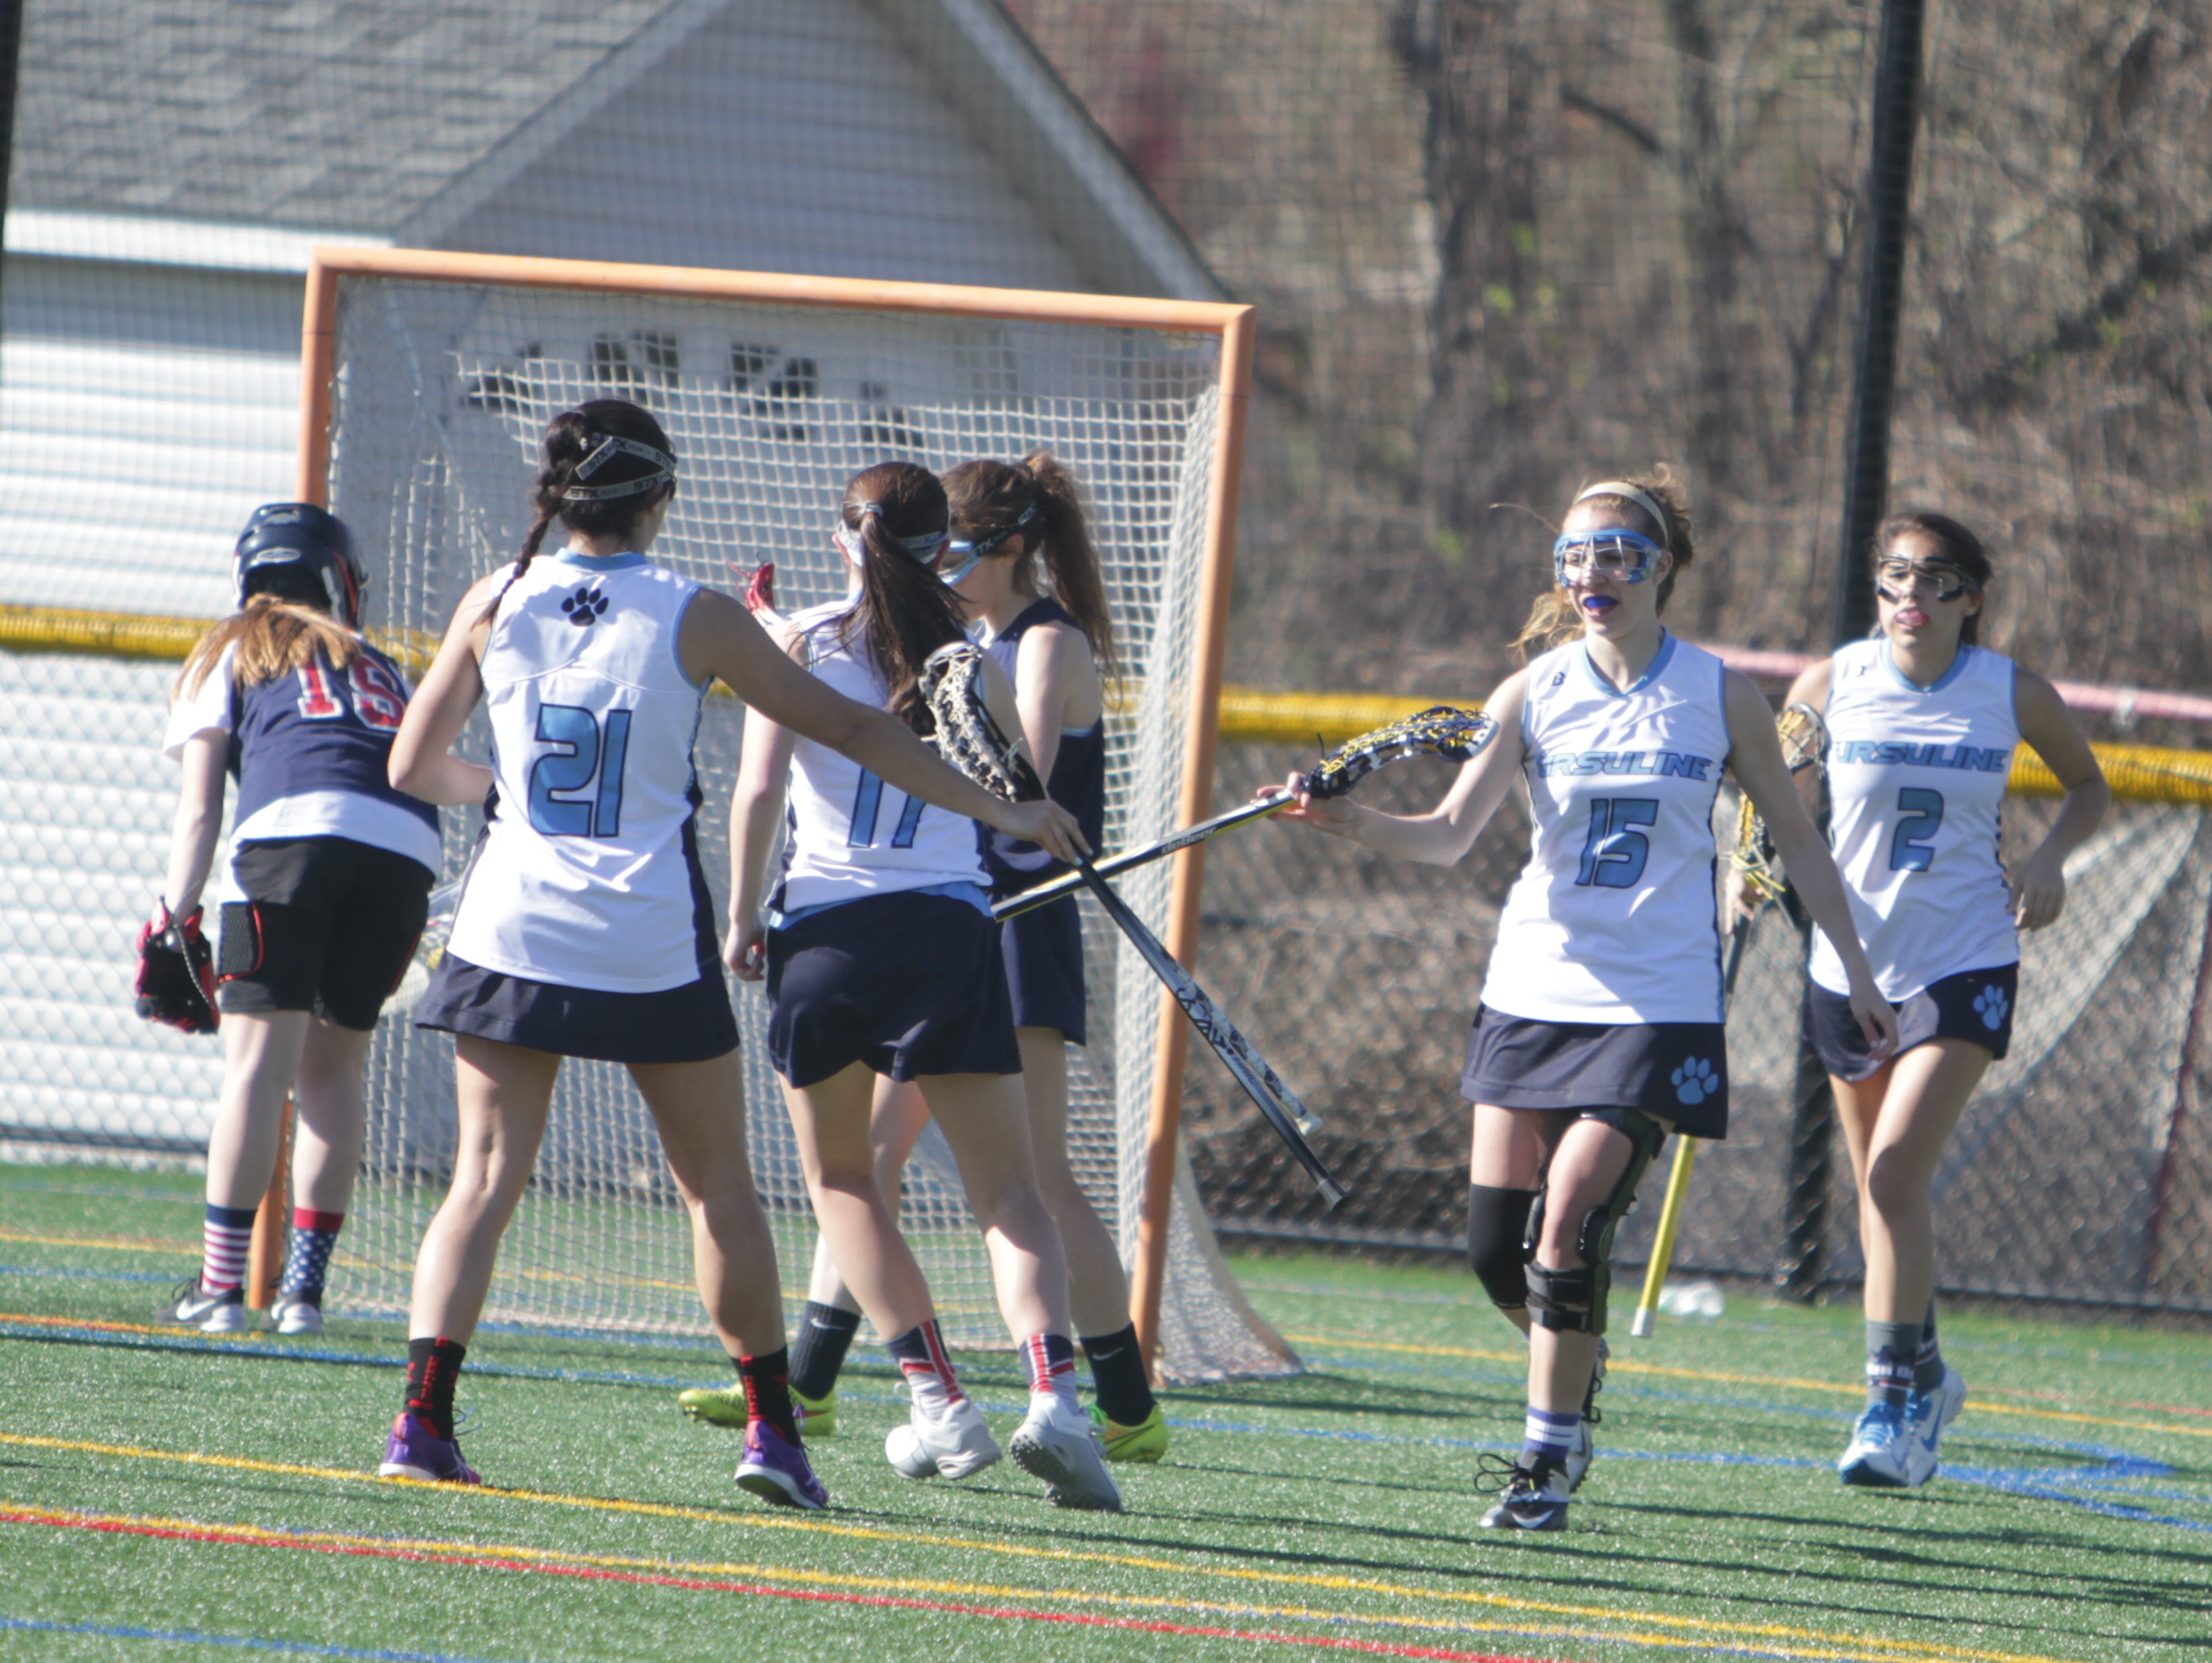 Ursuline celebrates after scoring a goal in the first half during a girls lacrosse game between Ursuline and Kennedy at the Ursuline School on Tuesday, April 19th, 2016. Ursuline won 18-10.